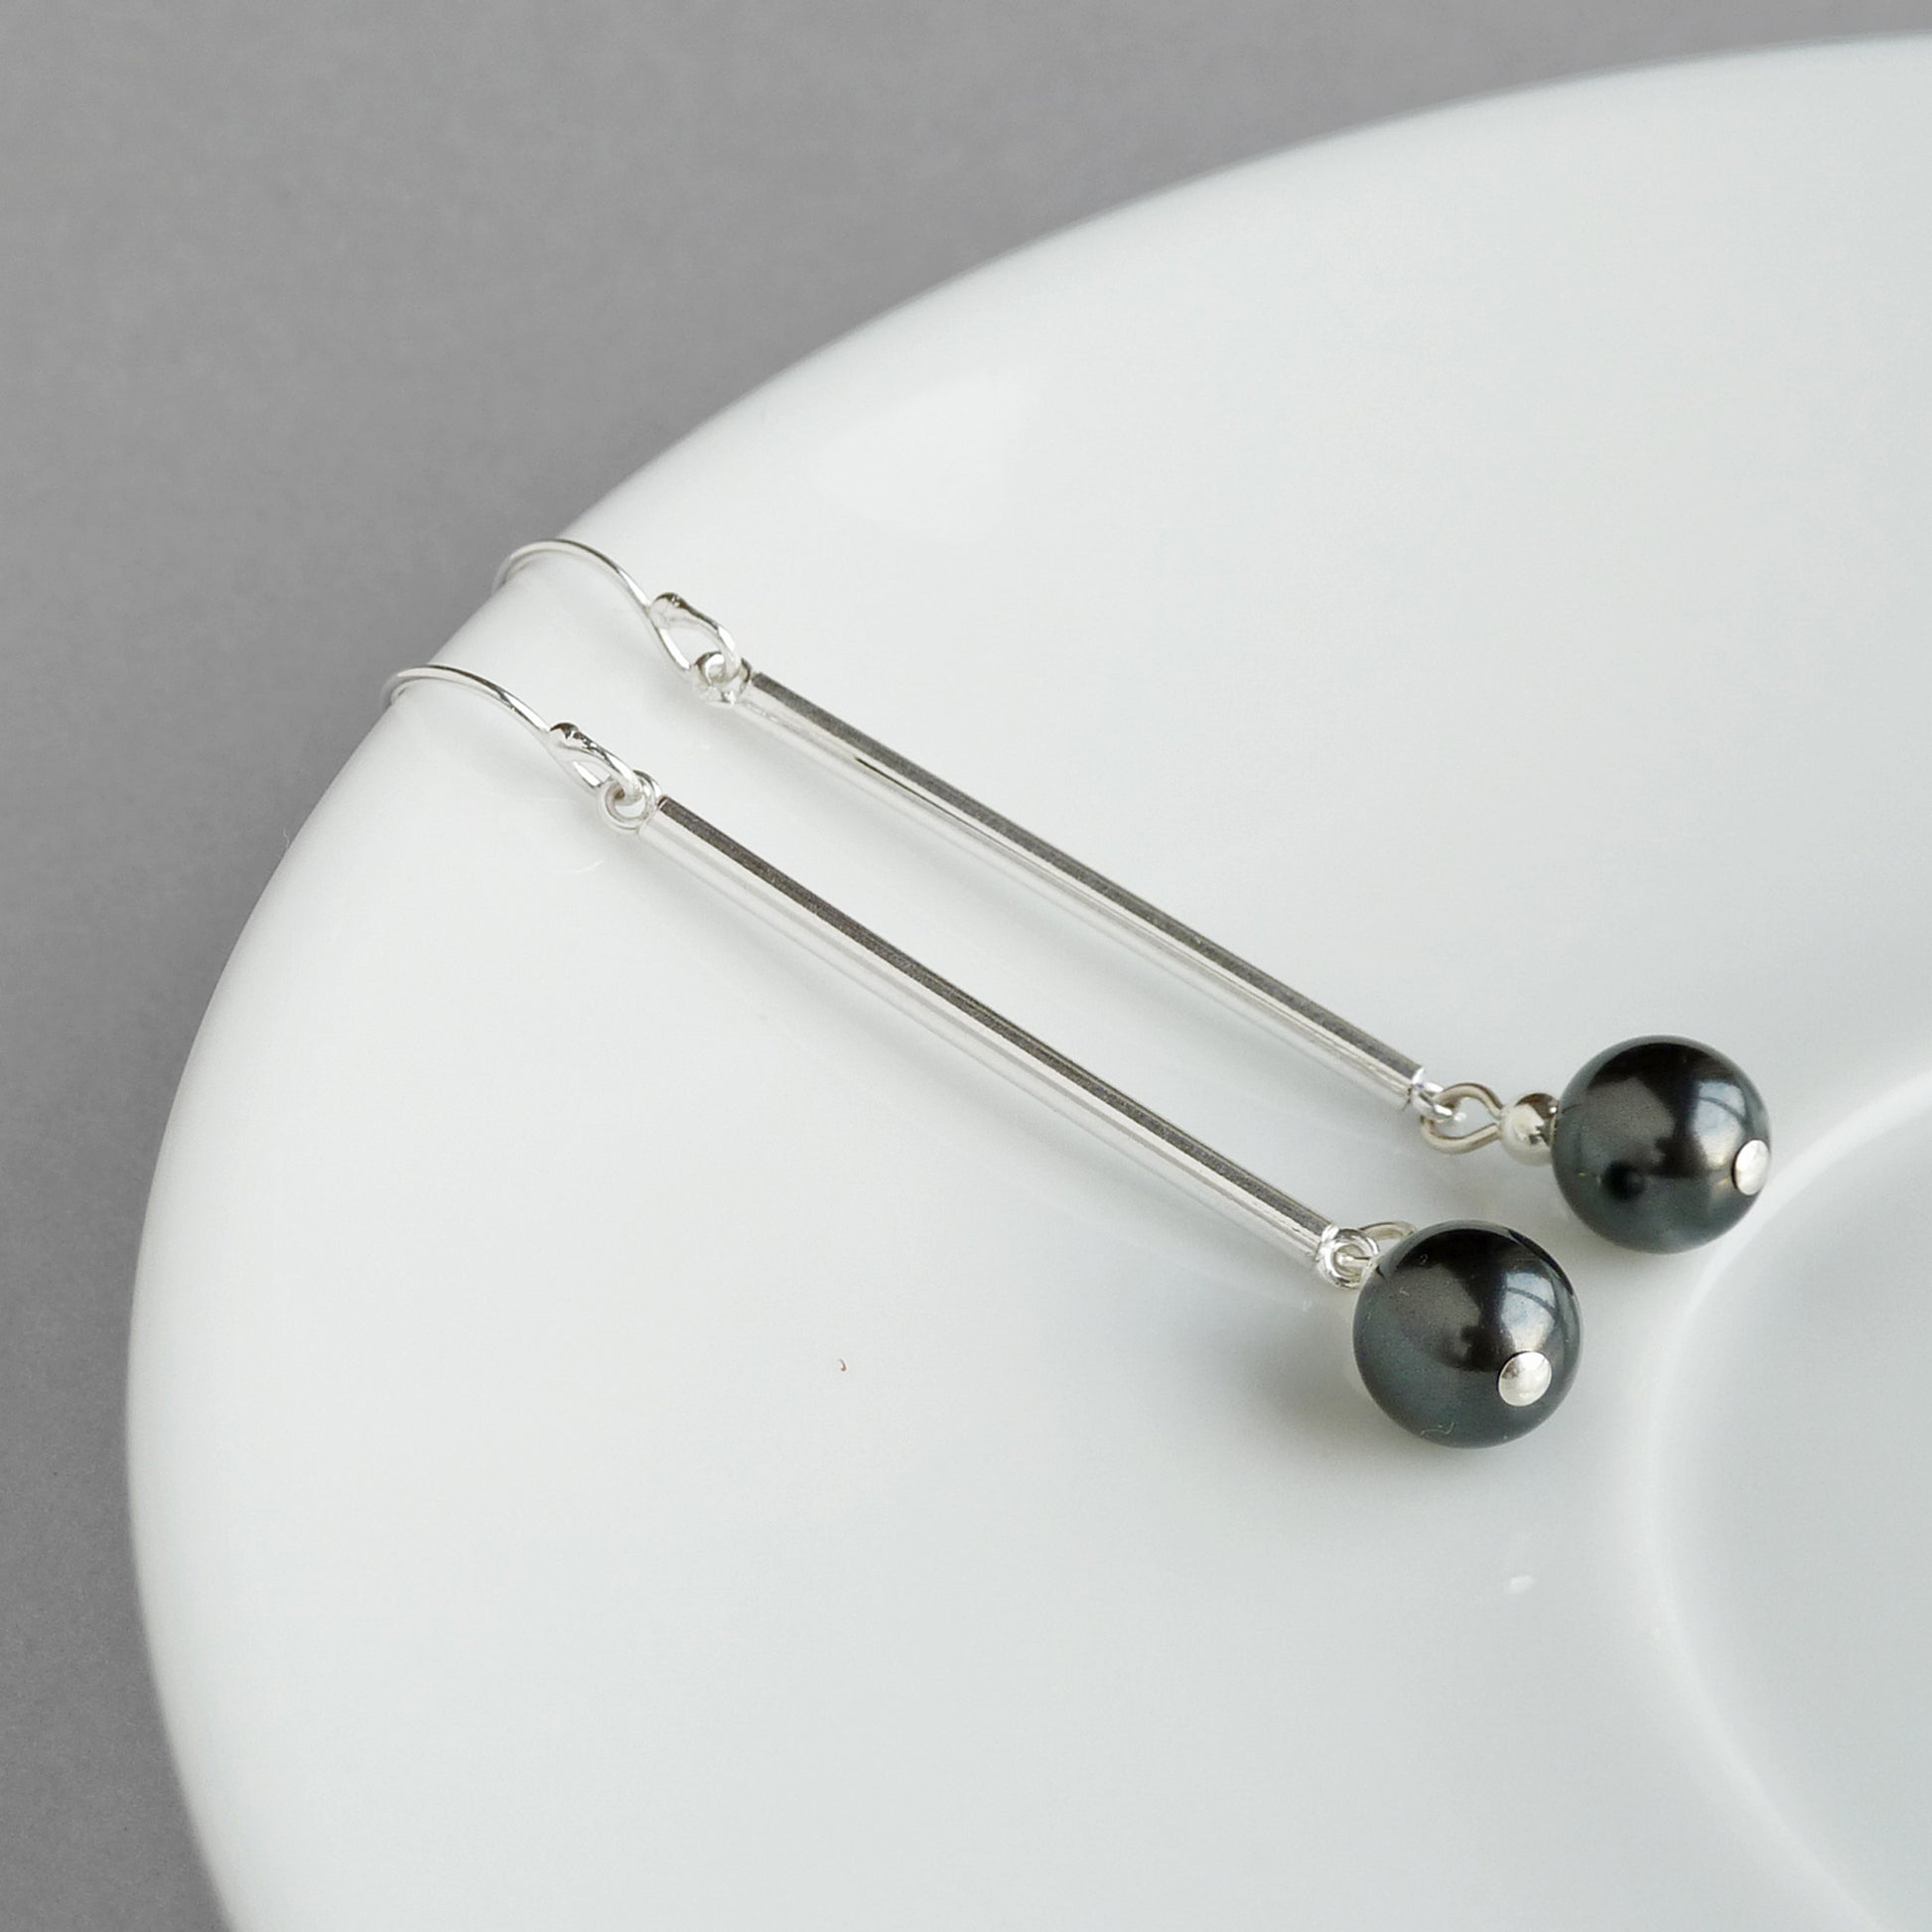 Charcoal grey drop earrings with Sterling silver hooks